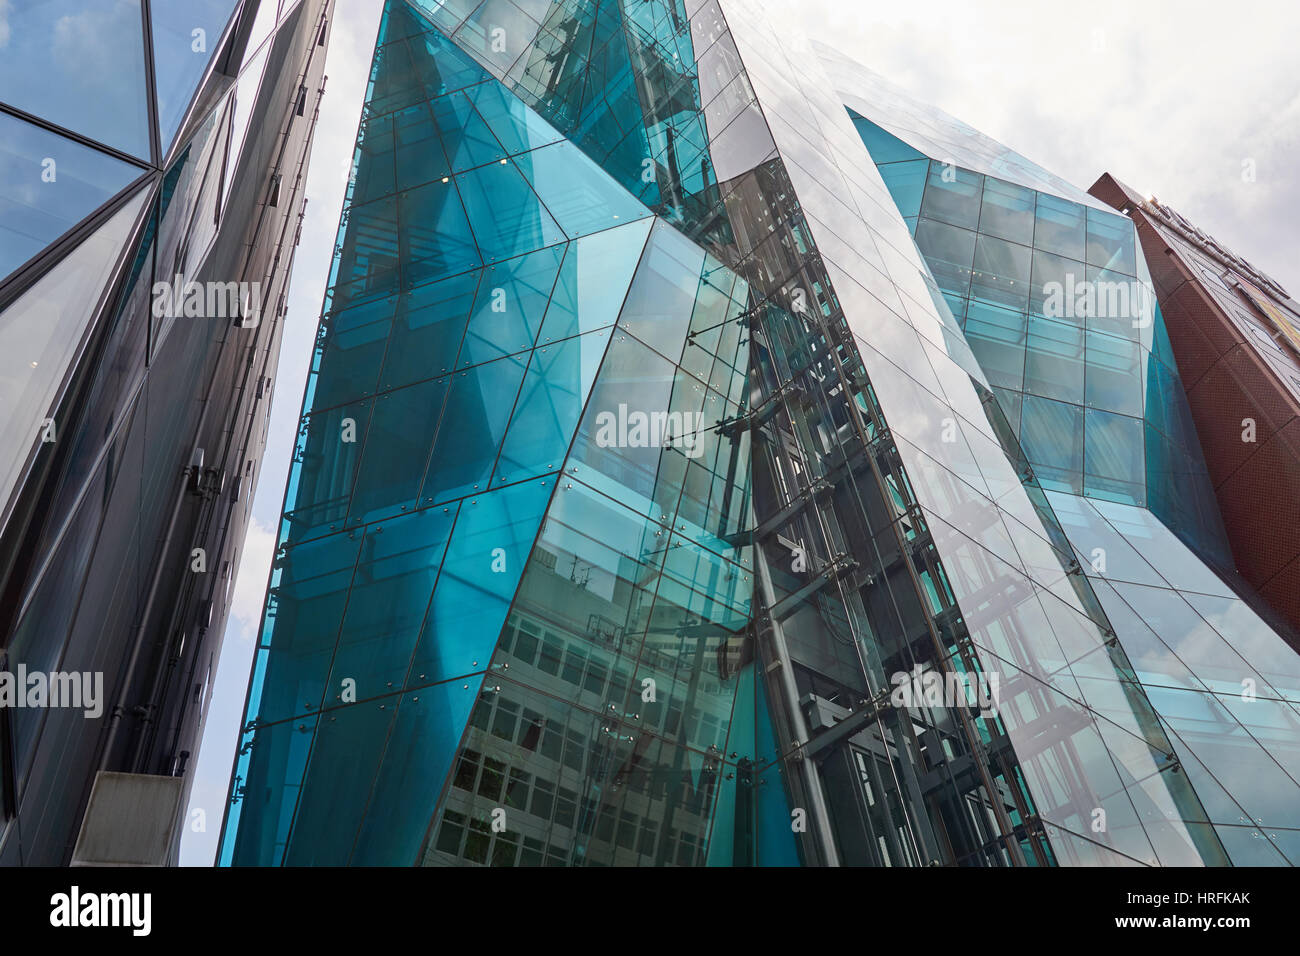 Modern architecture in Tokyo, the amazing Audi Forum building, with asymmetric reflecting glass facade, also called Iceberg, in Shibuya, Tokyo, Japan Stock Photo